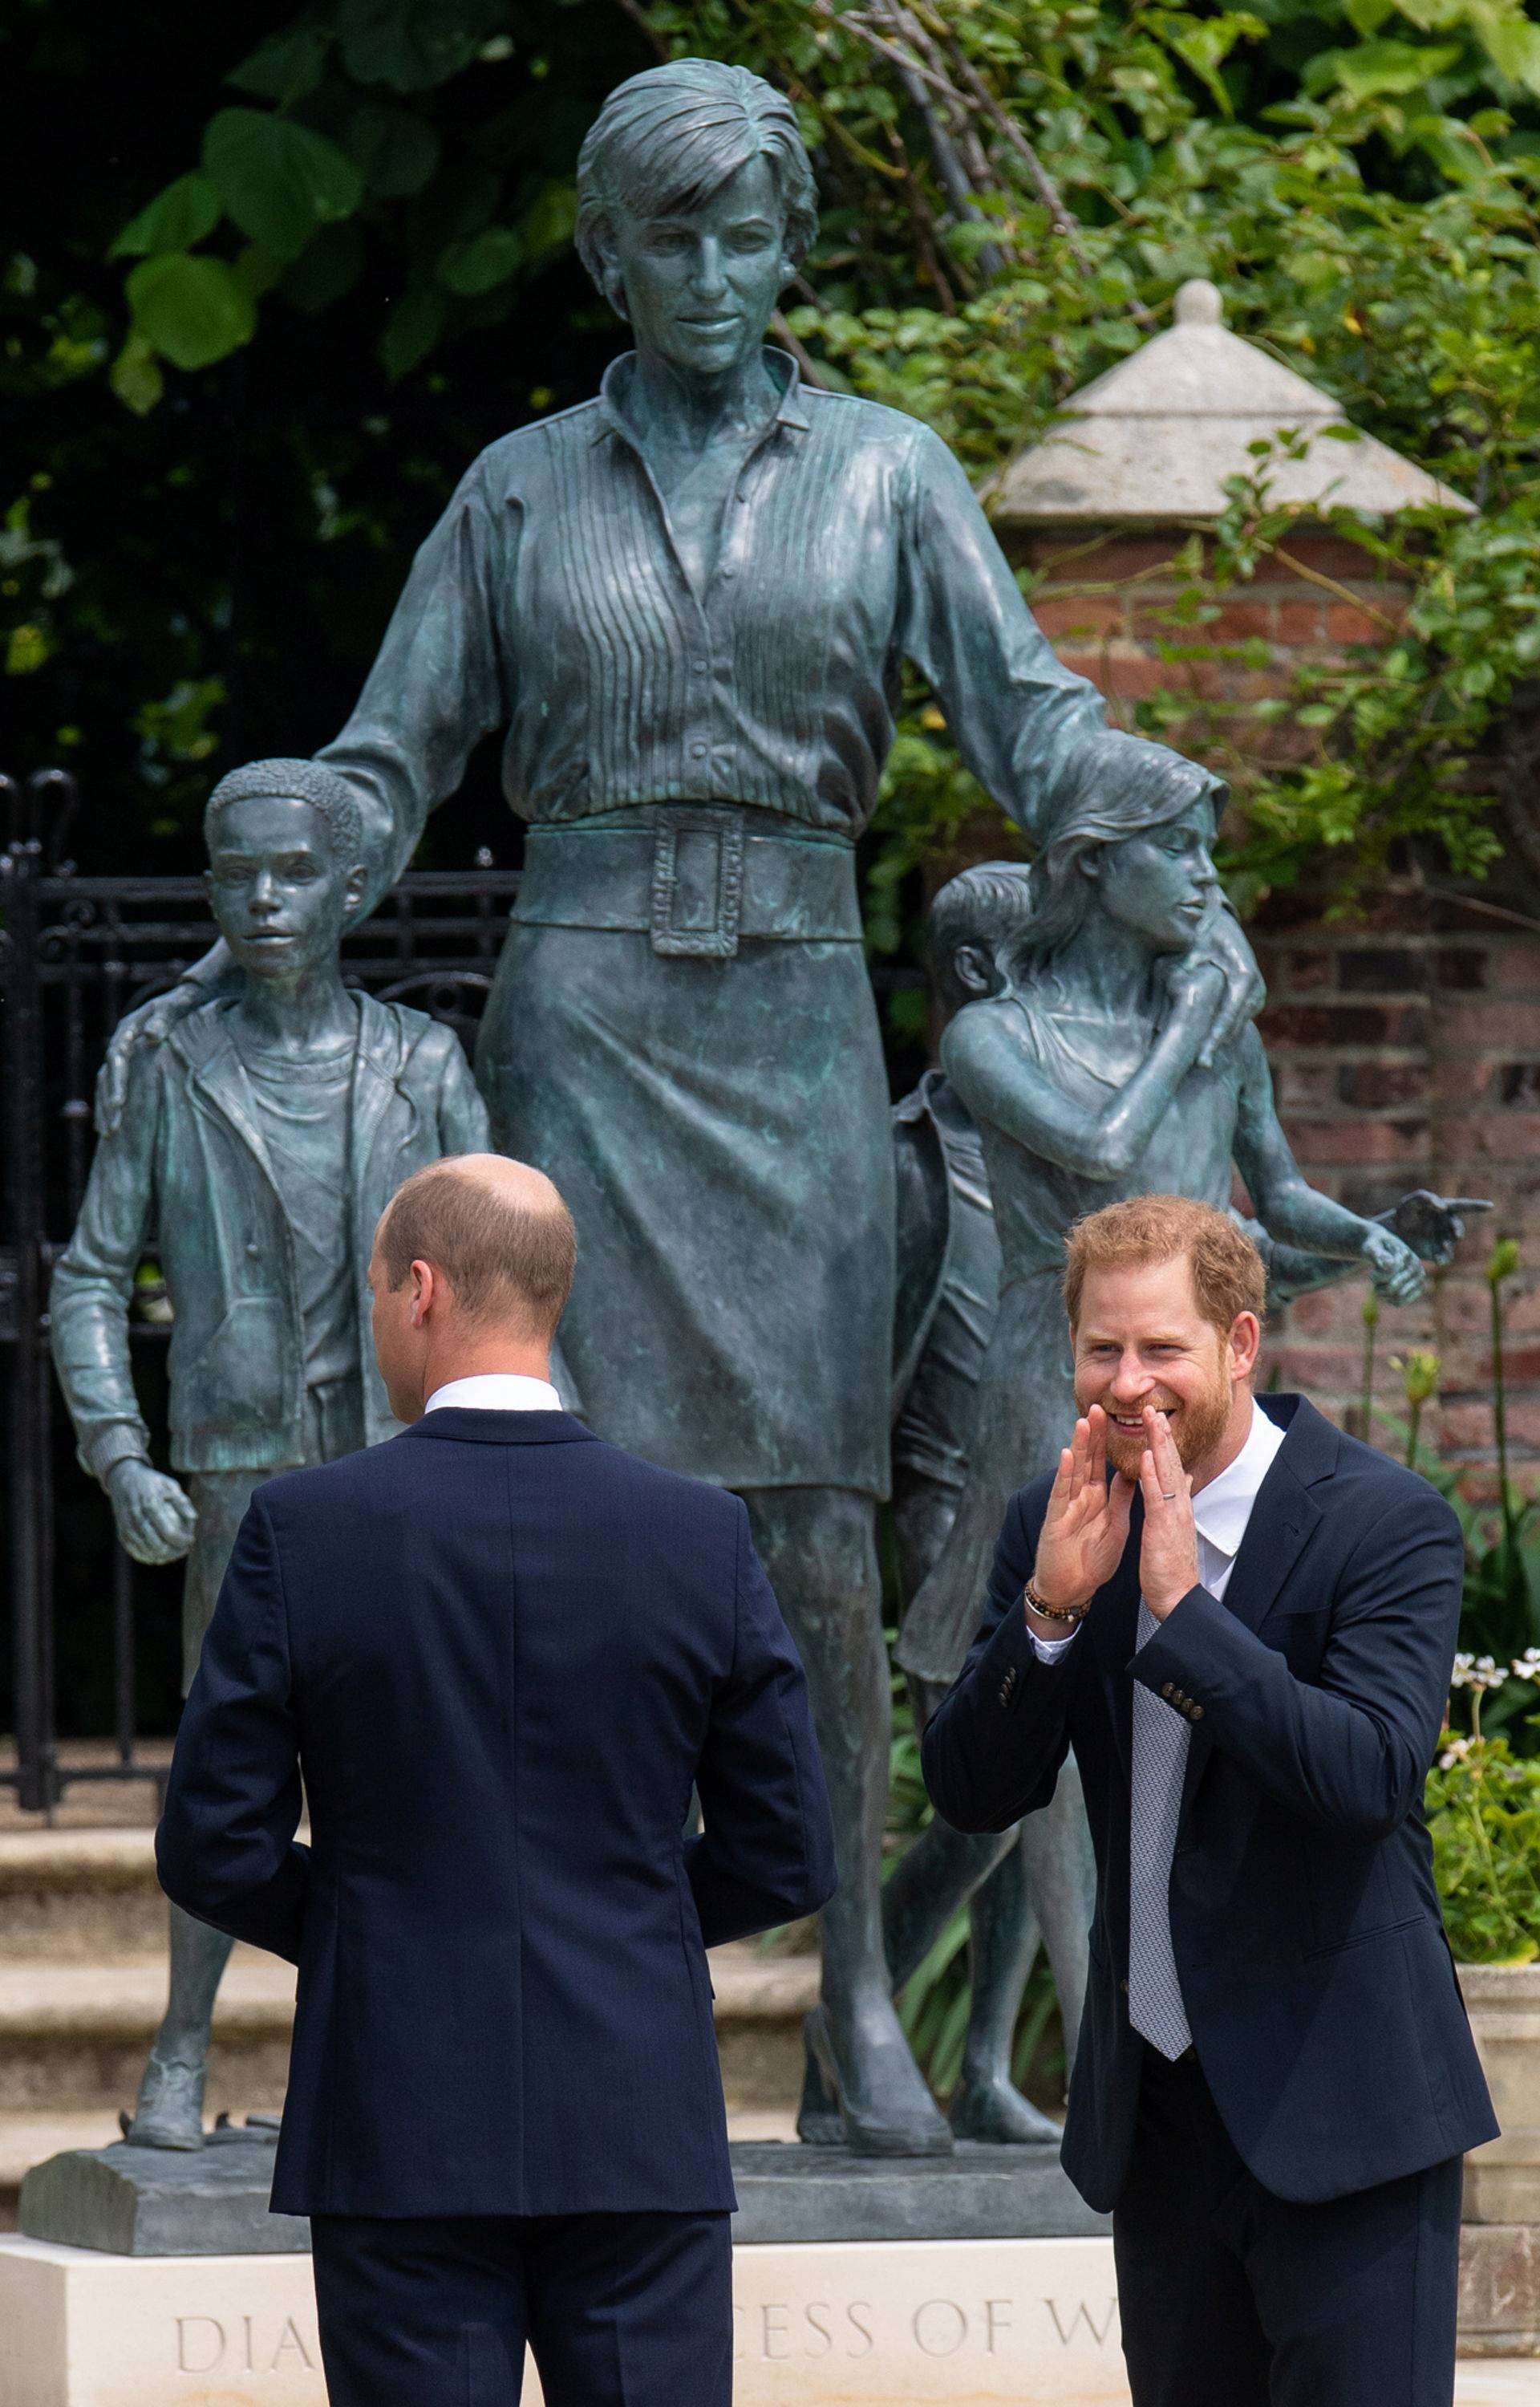 Statue of Britain's Princess Diana is unveiled in London